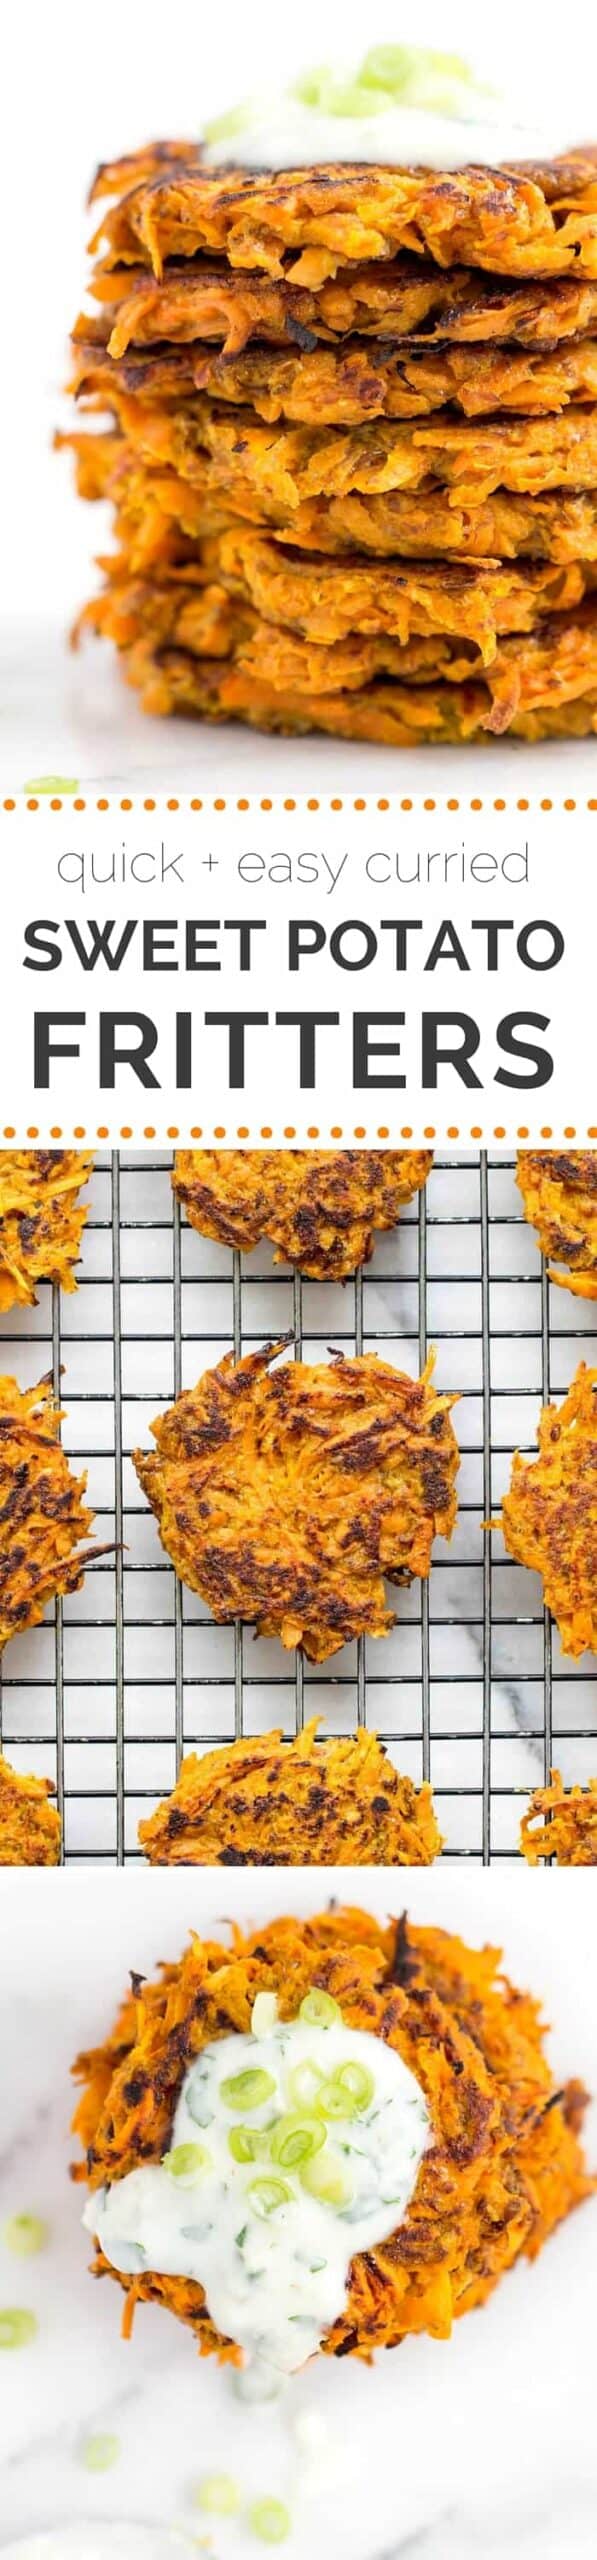 Curried Sweet Potato + Carrot Fritters image